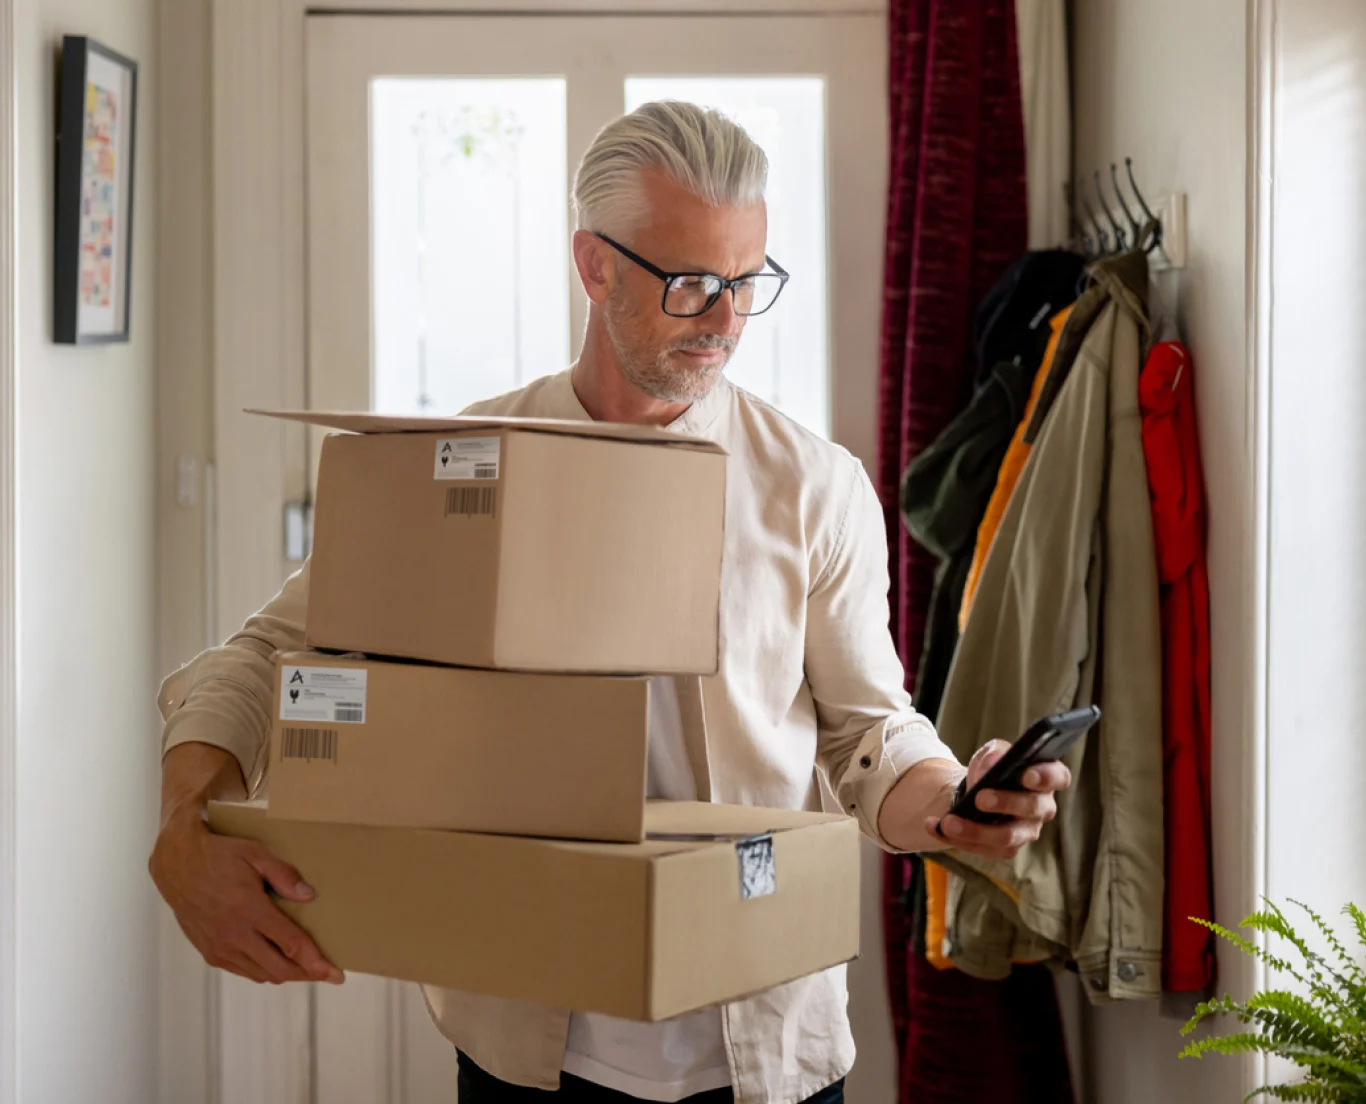 Man holding 3 boxes at home while looking at phone screen